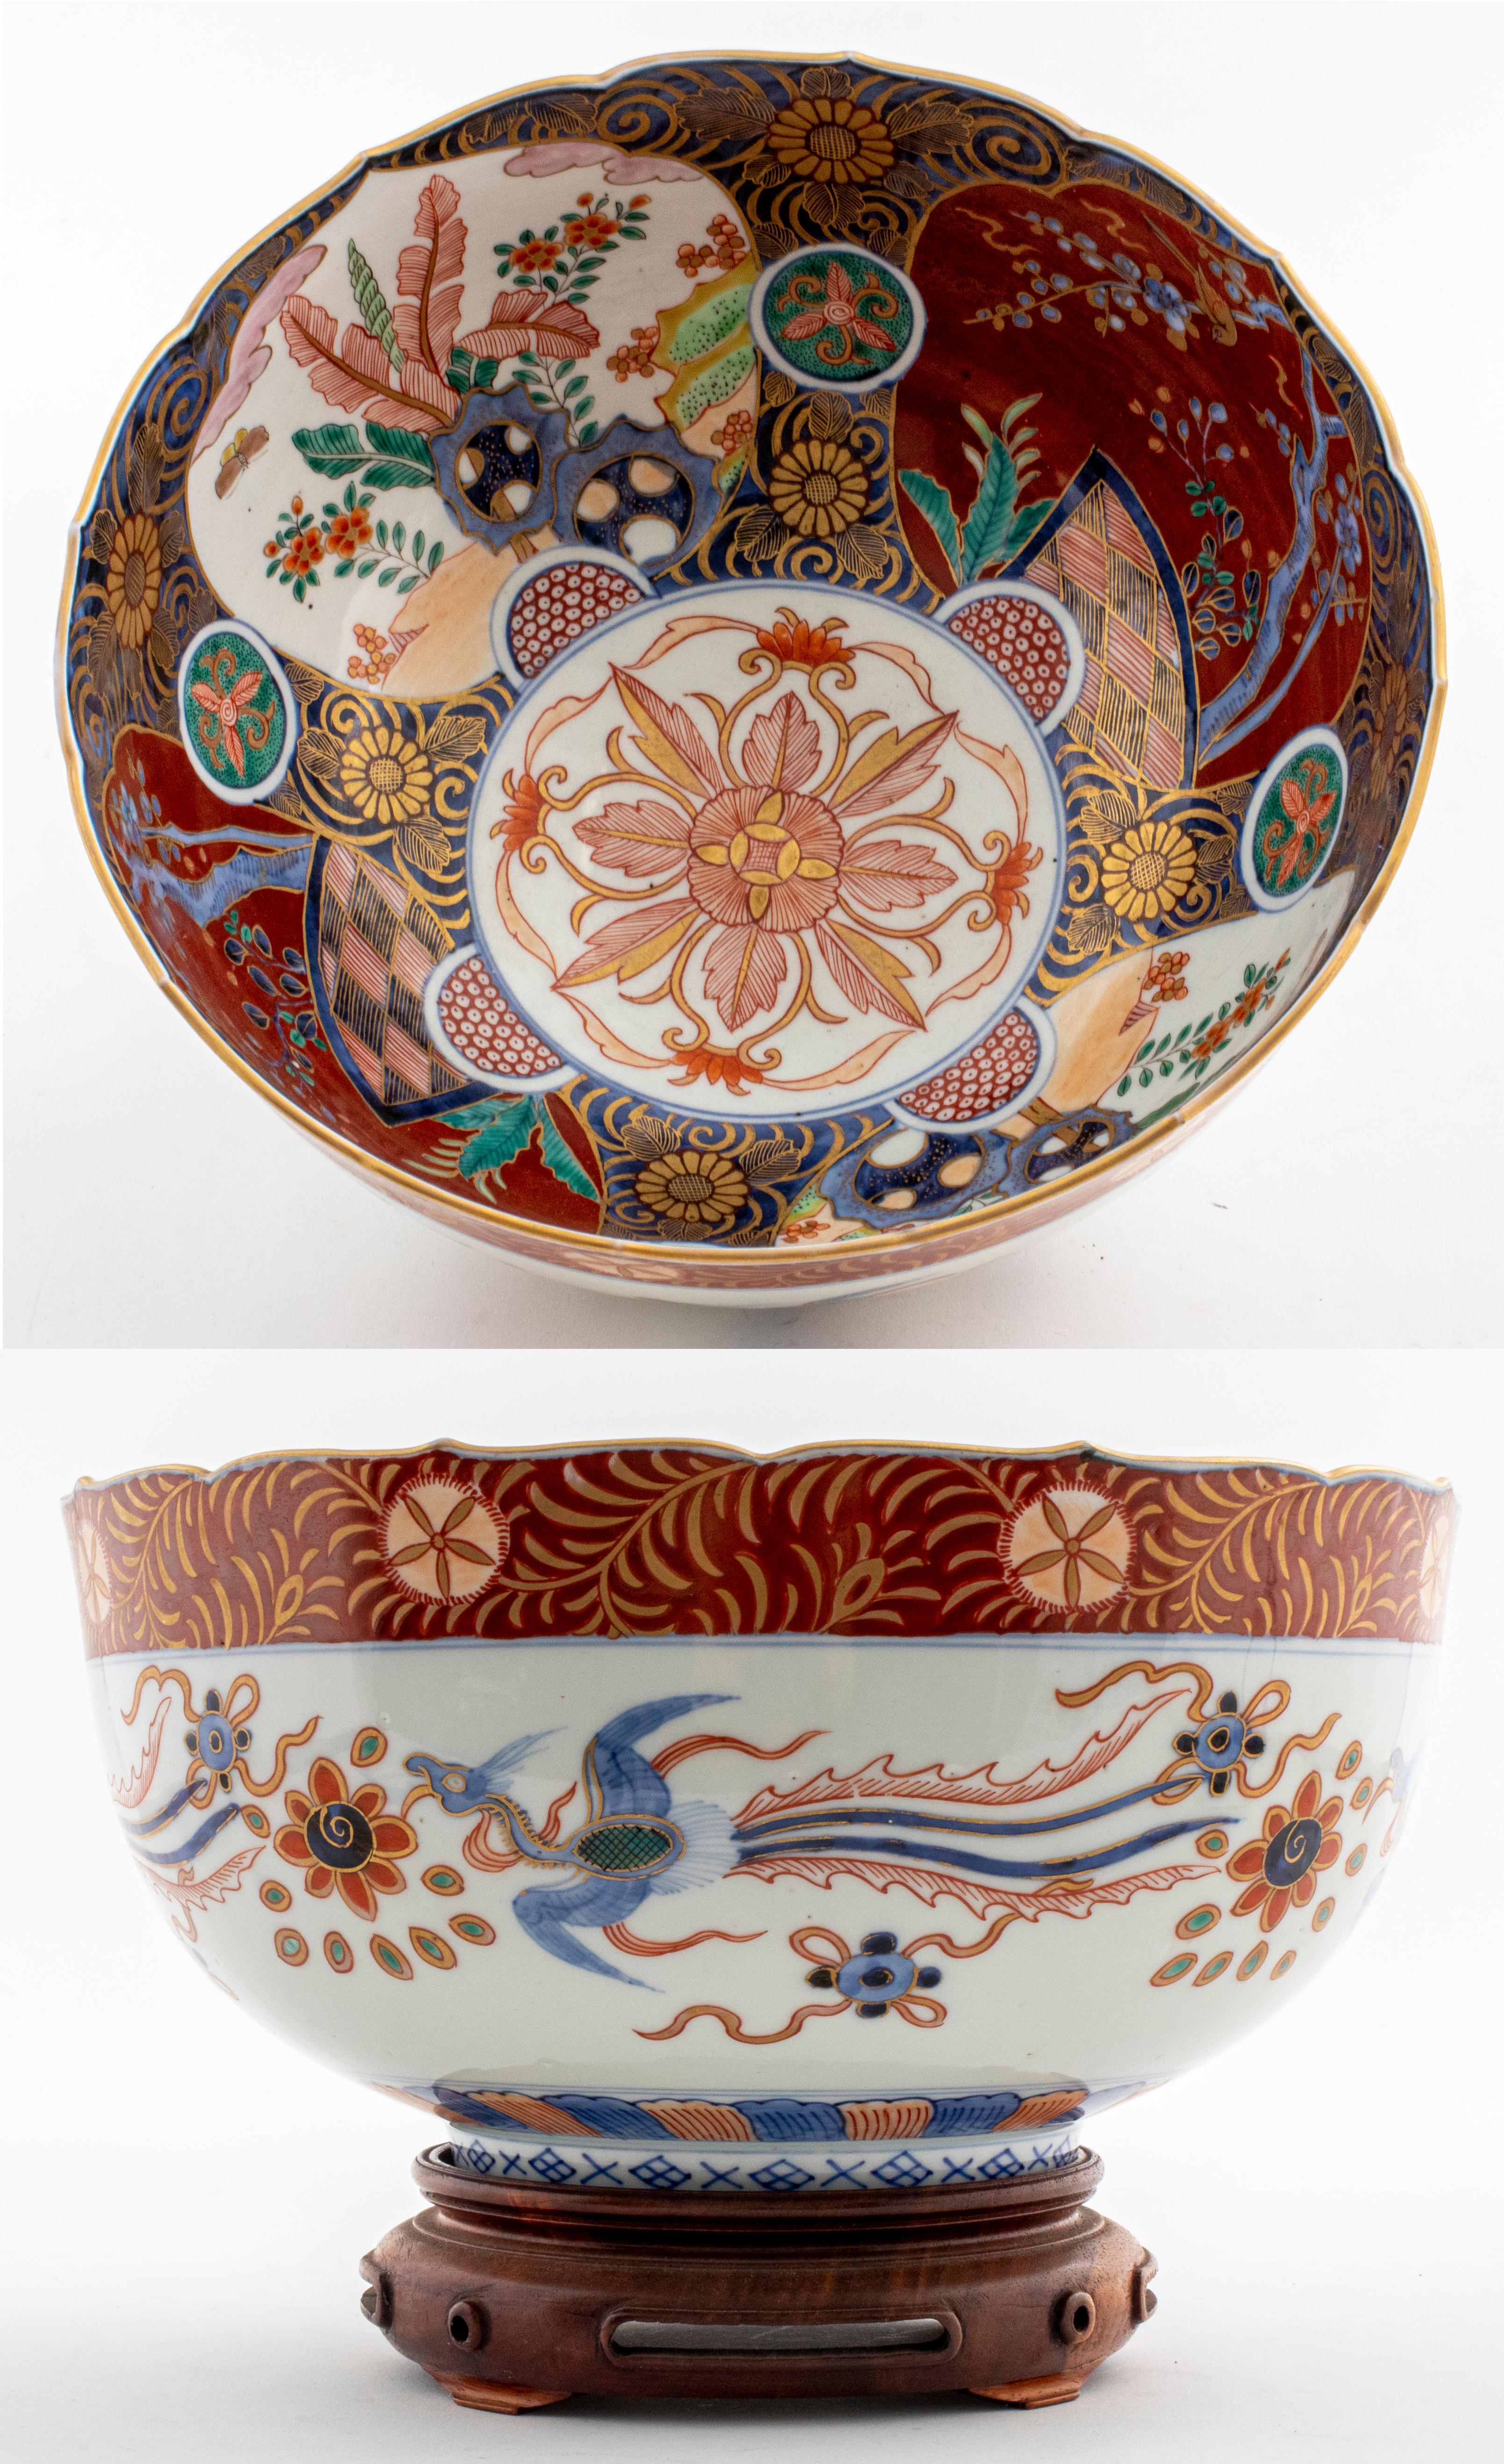 Japanese Imari porcelain bowl, painted and parcel gilt, with floral themed interior and flying phoenix birds on the exterior, on carved wood stand. Measures: 5.75